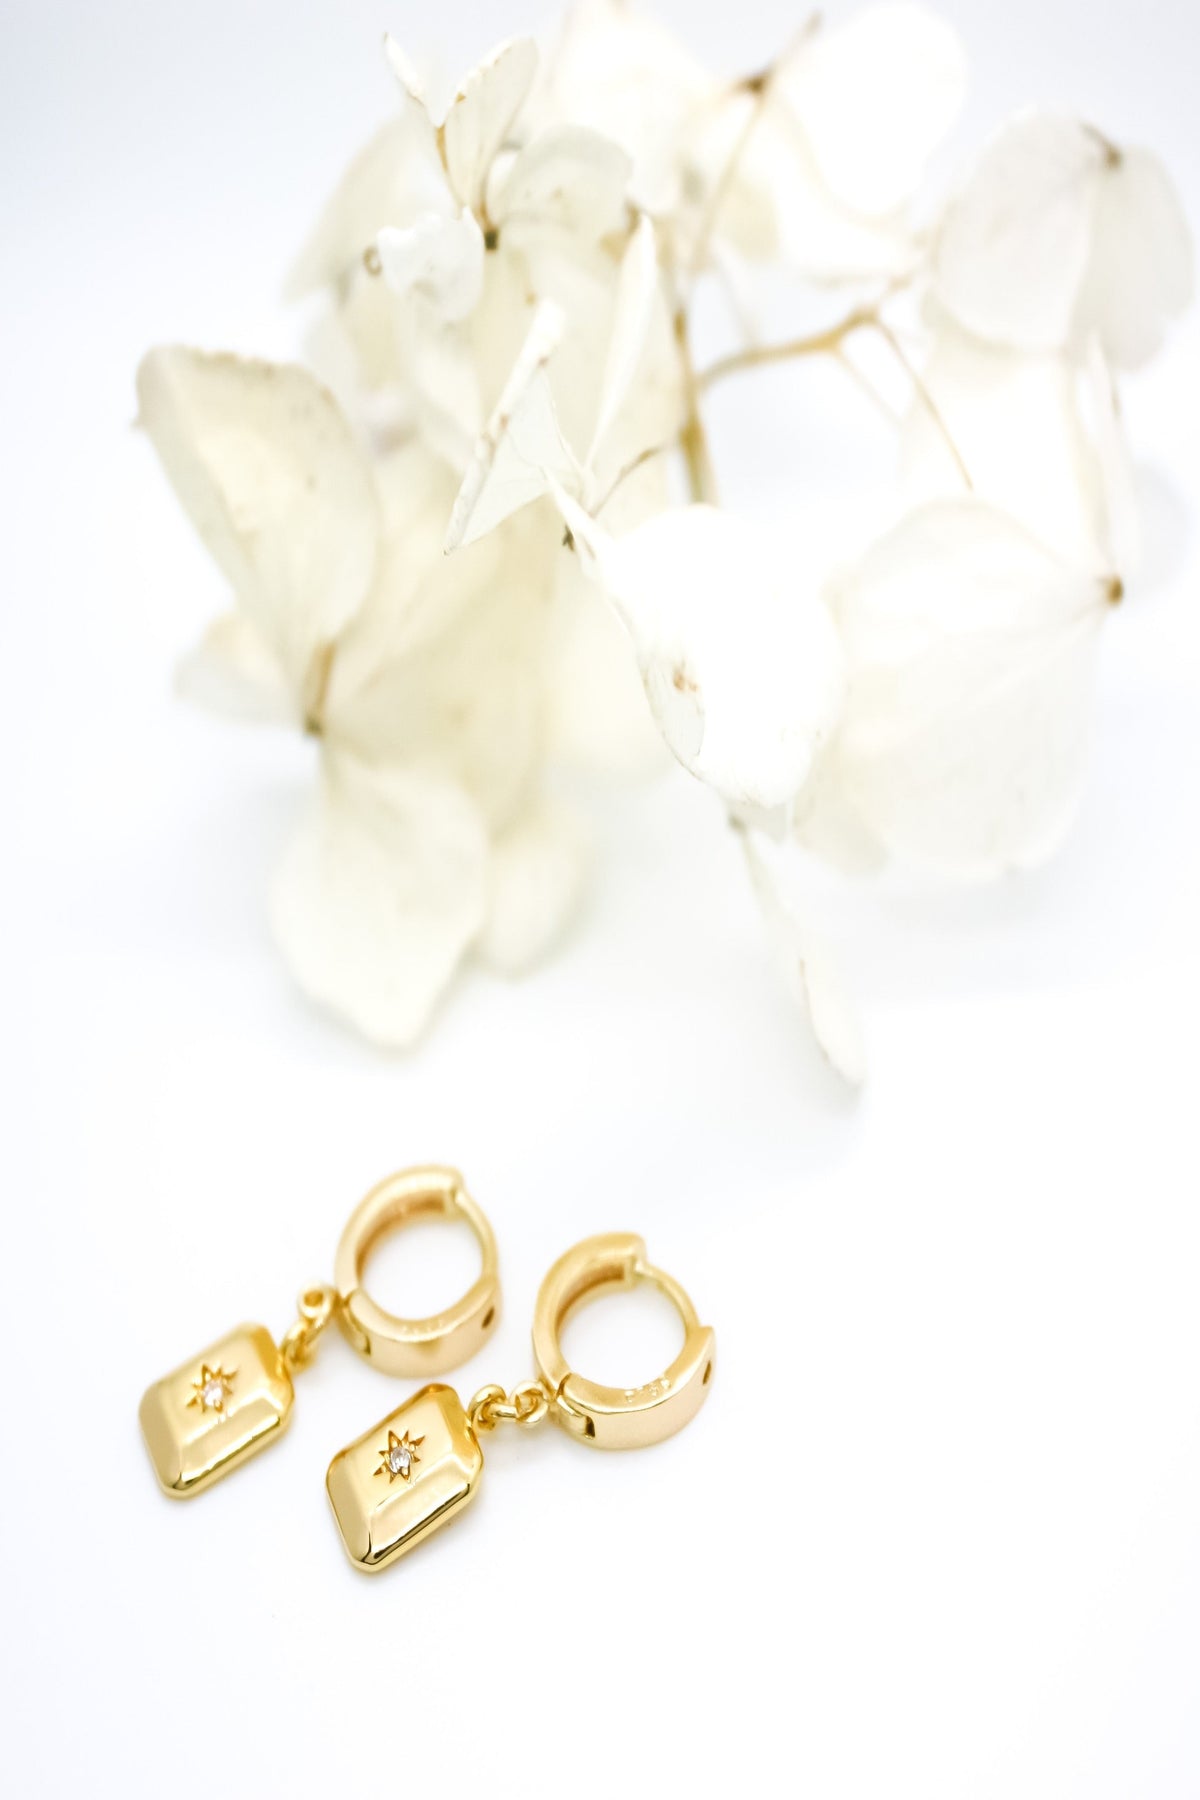 &quot;Gold-filled huggie earrings with classic bohemian design, featuring a rectangle charm with star burst in centre.&quot;&quot;